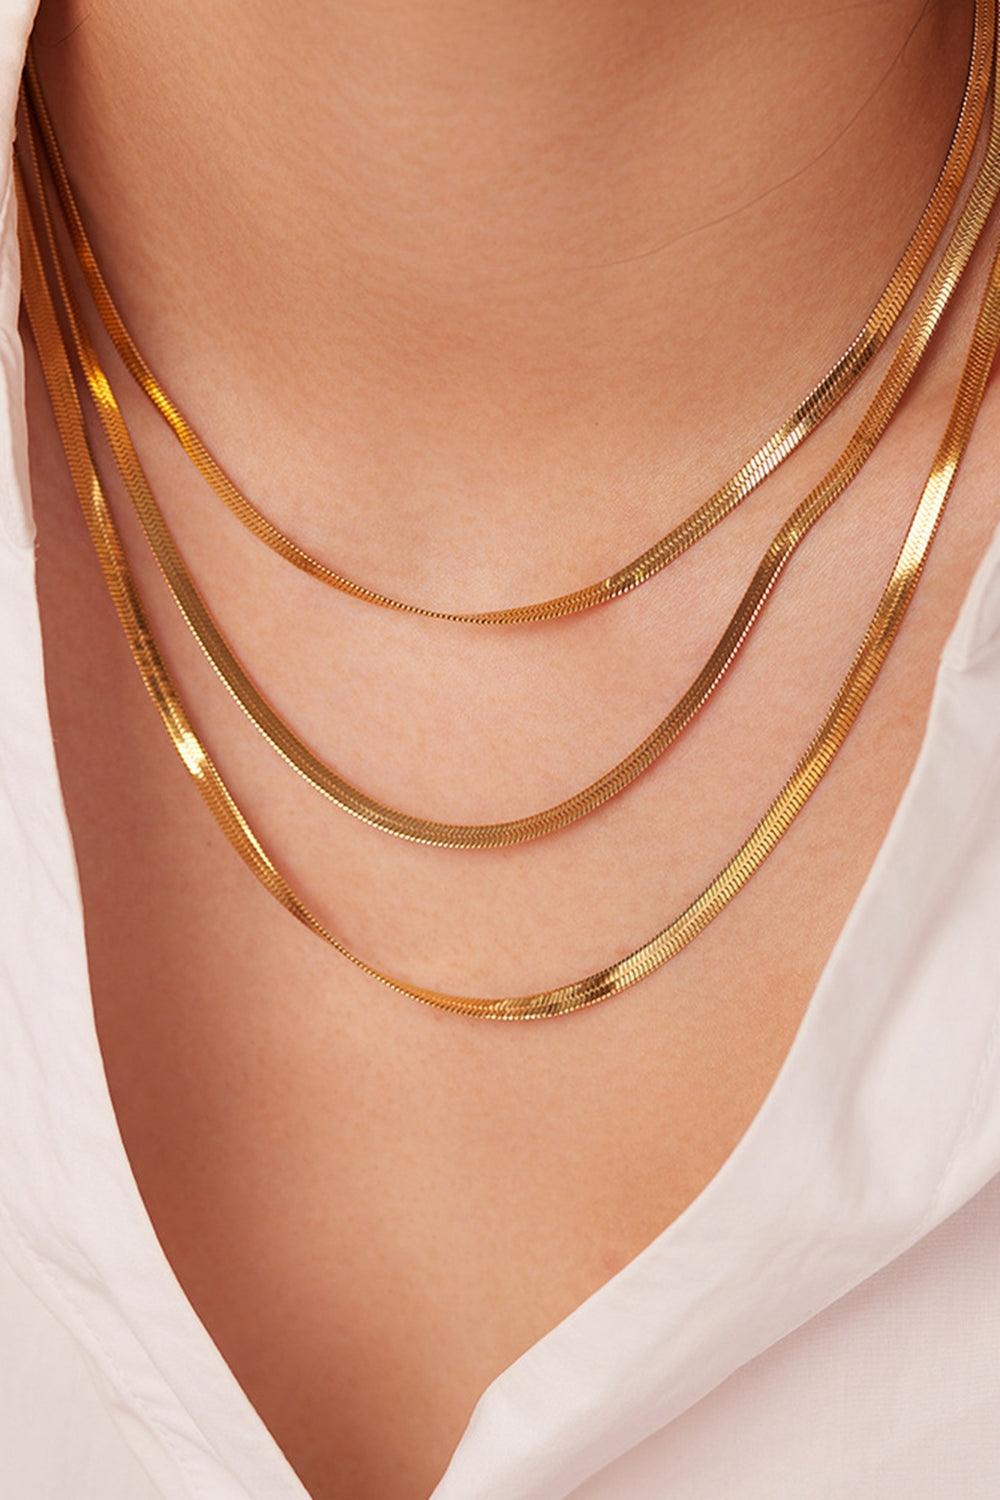 Triple-Layered Snake Chain Necklace - Glamorous Boutique USA L.L.C.